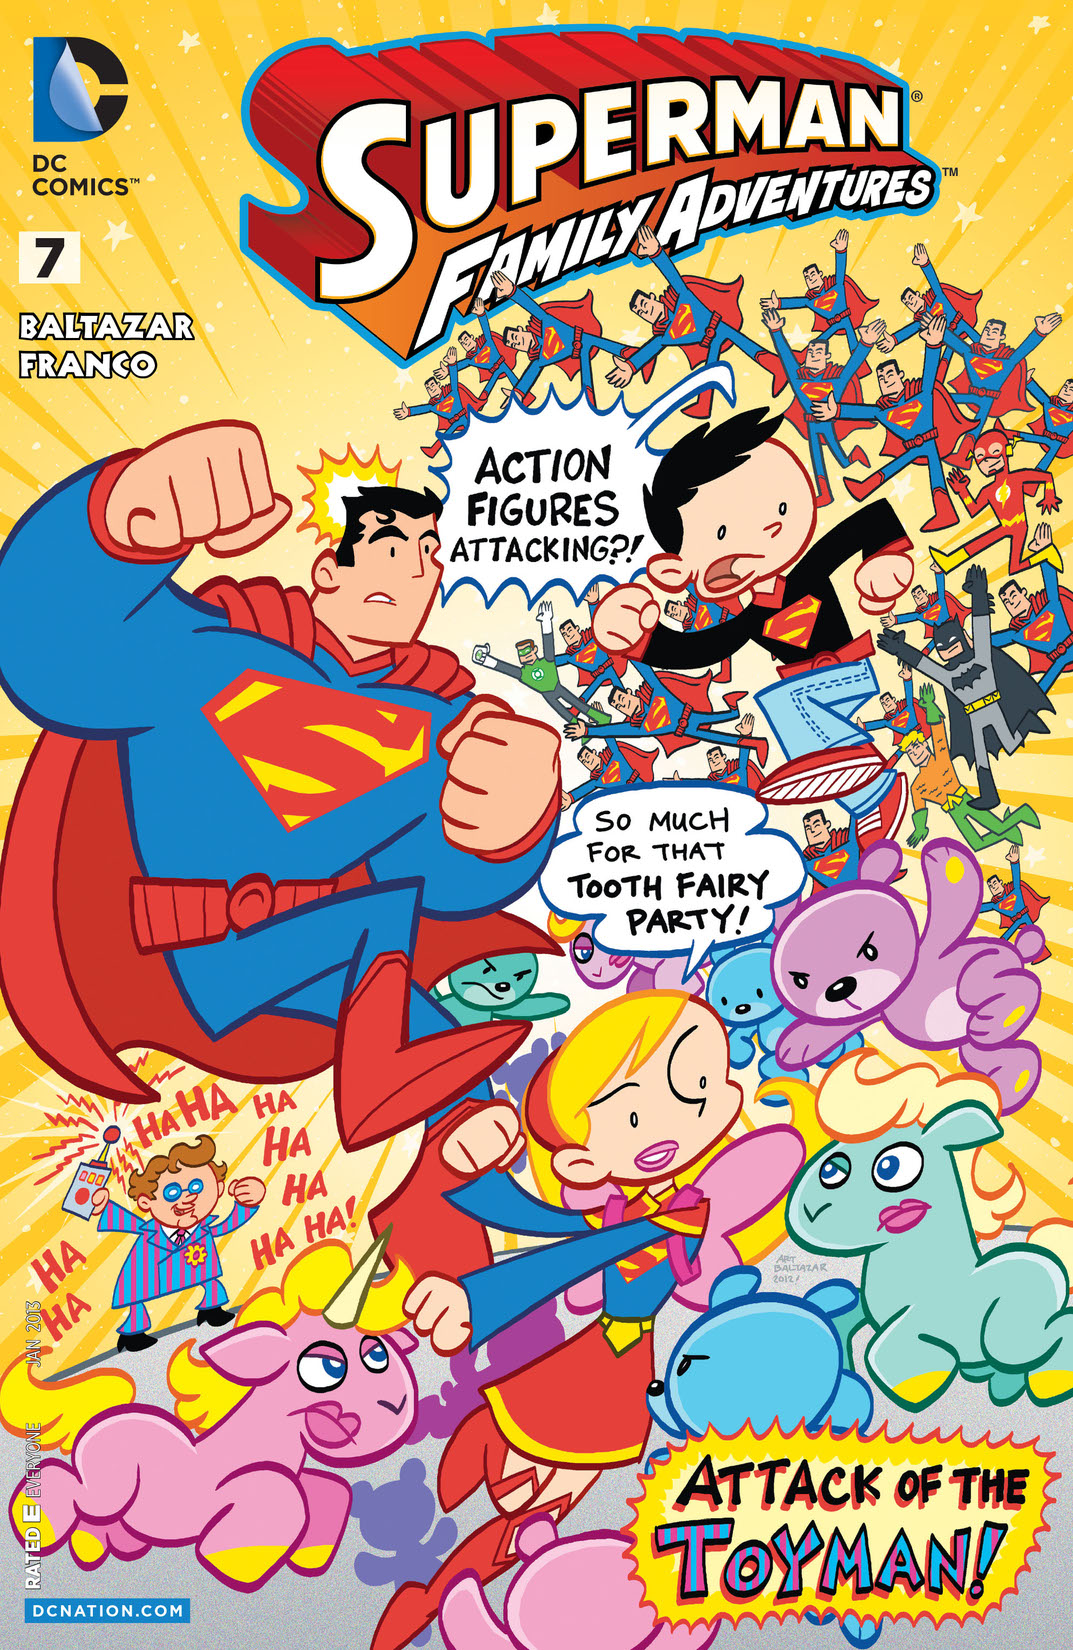 Superman Family Adventures #7 preview images